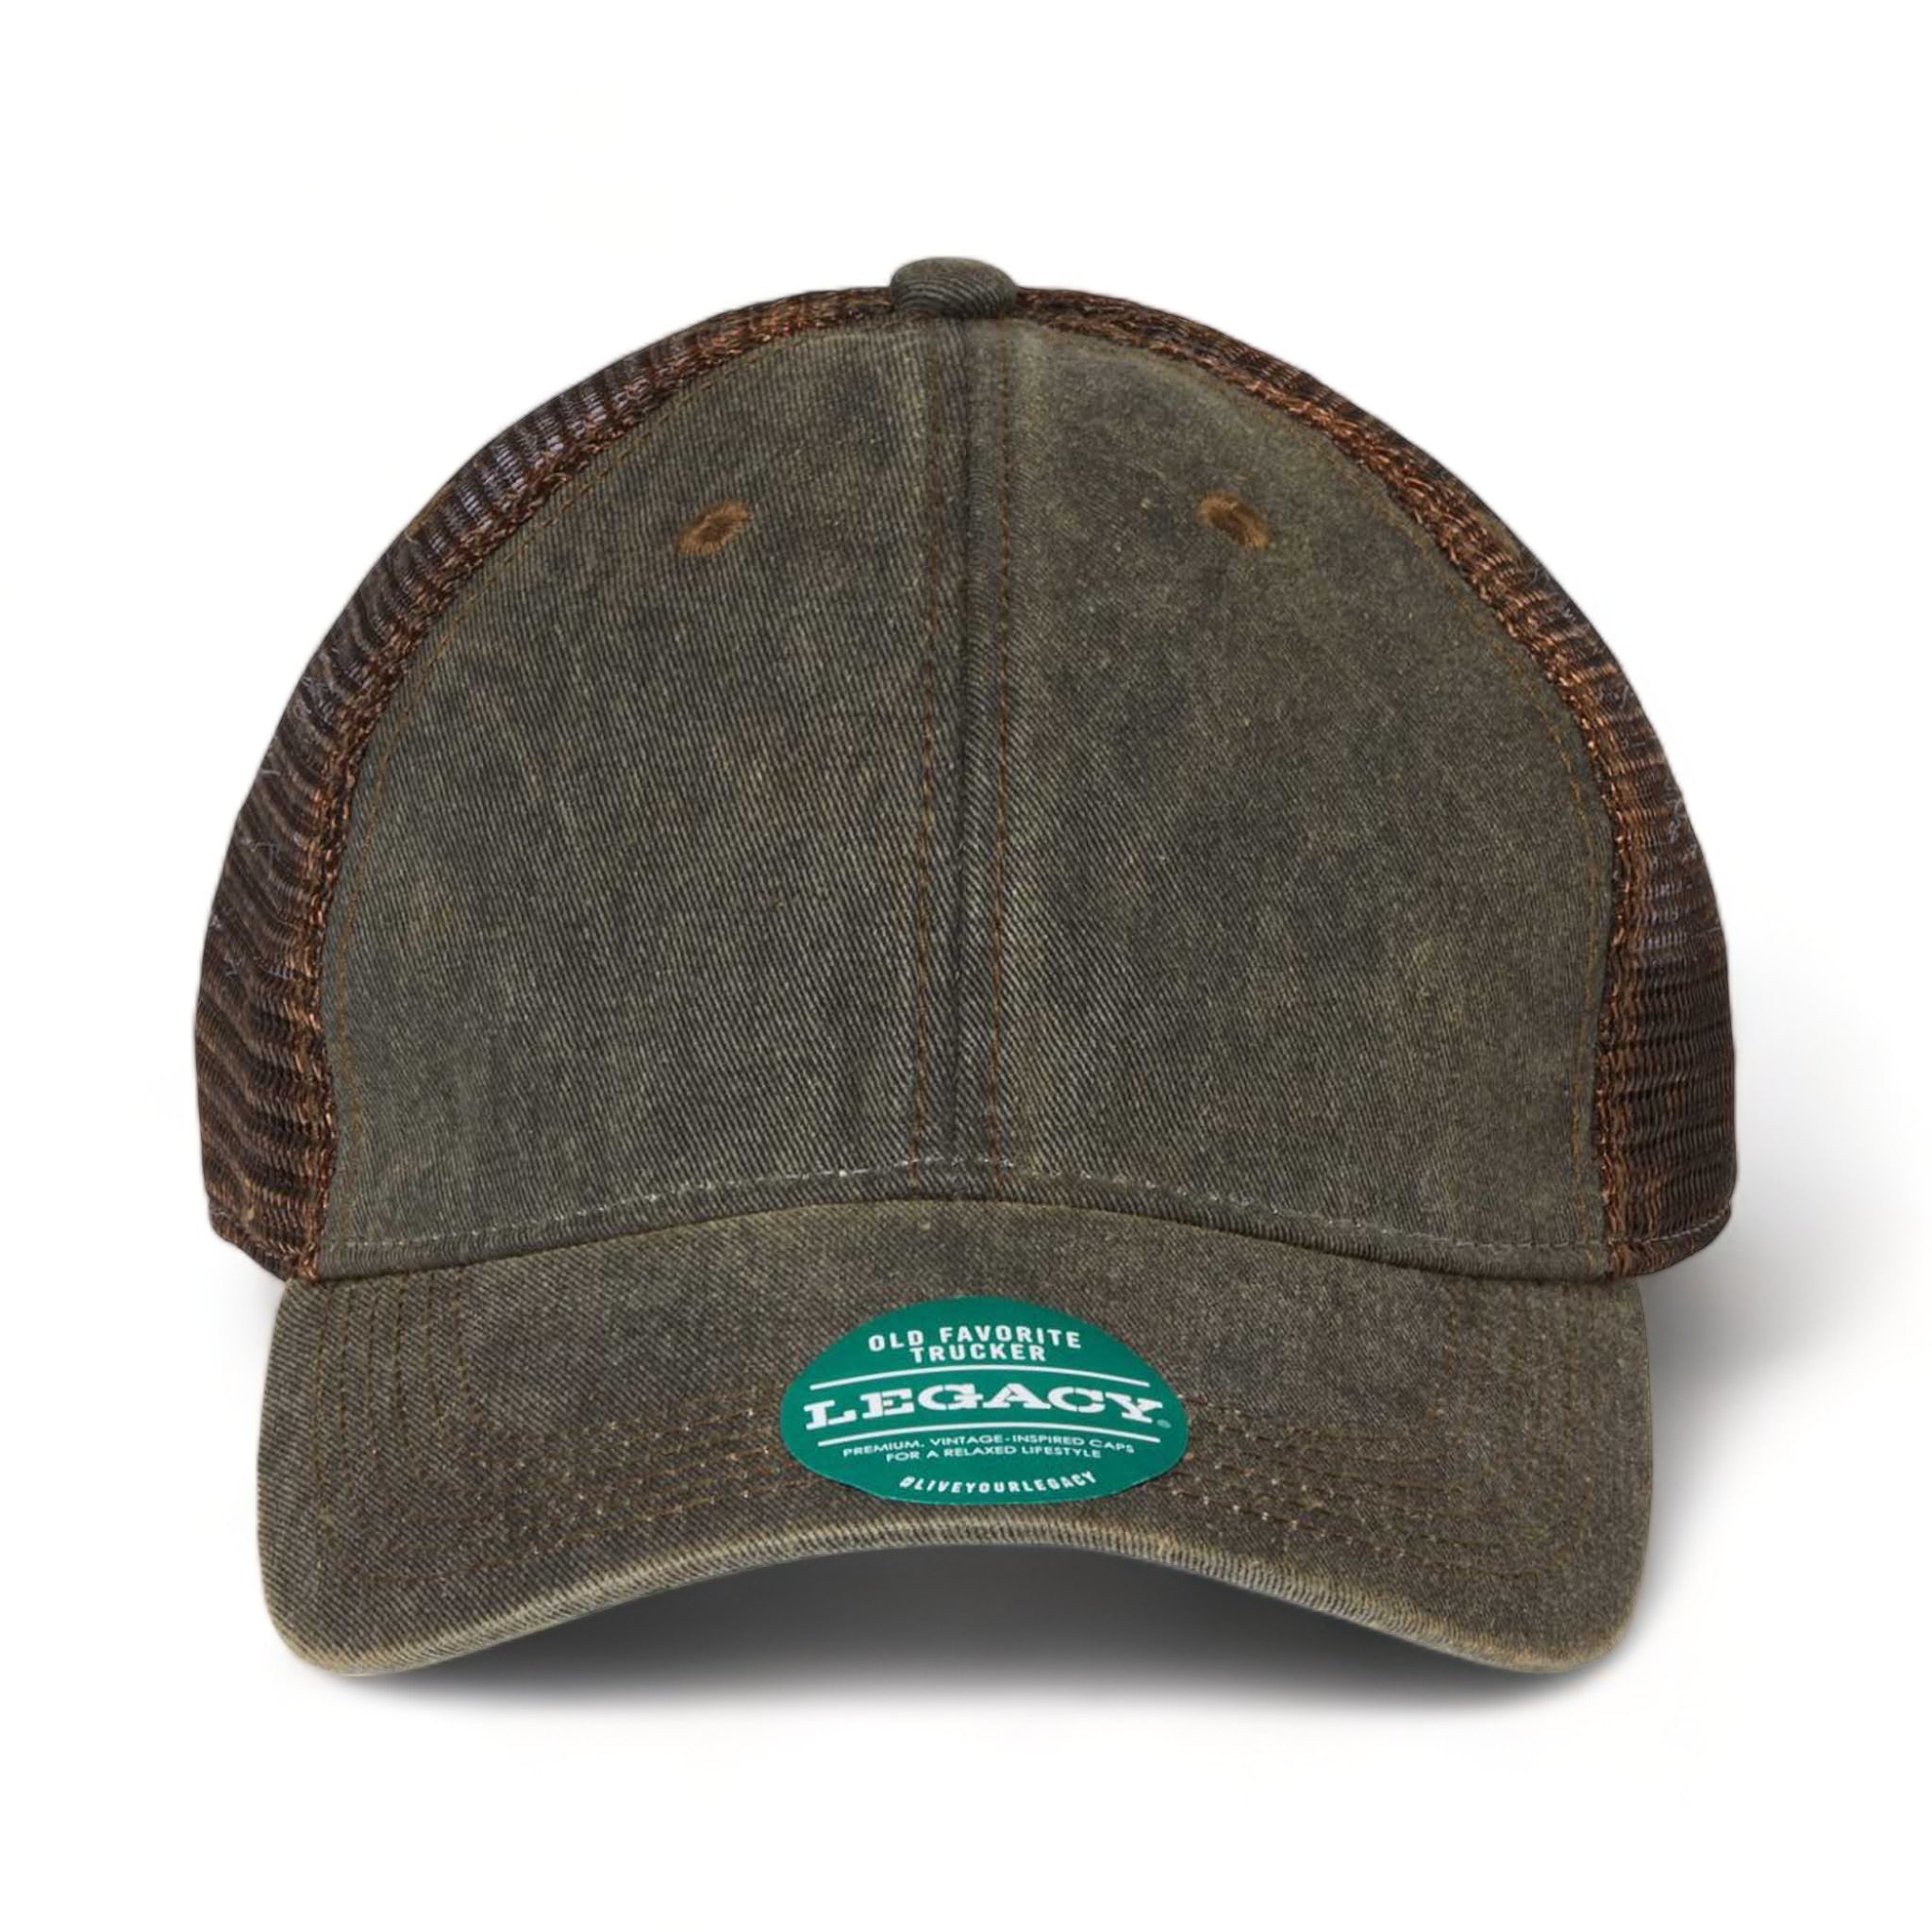 Front view of LEGACY OFA custom hat in black and brown